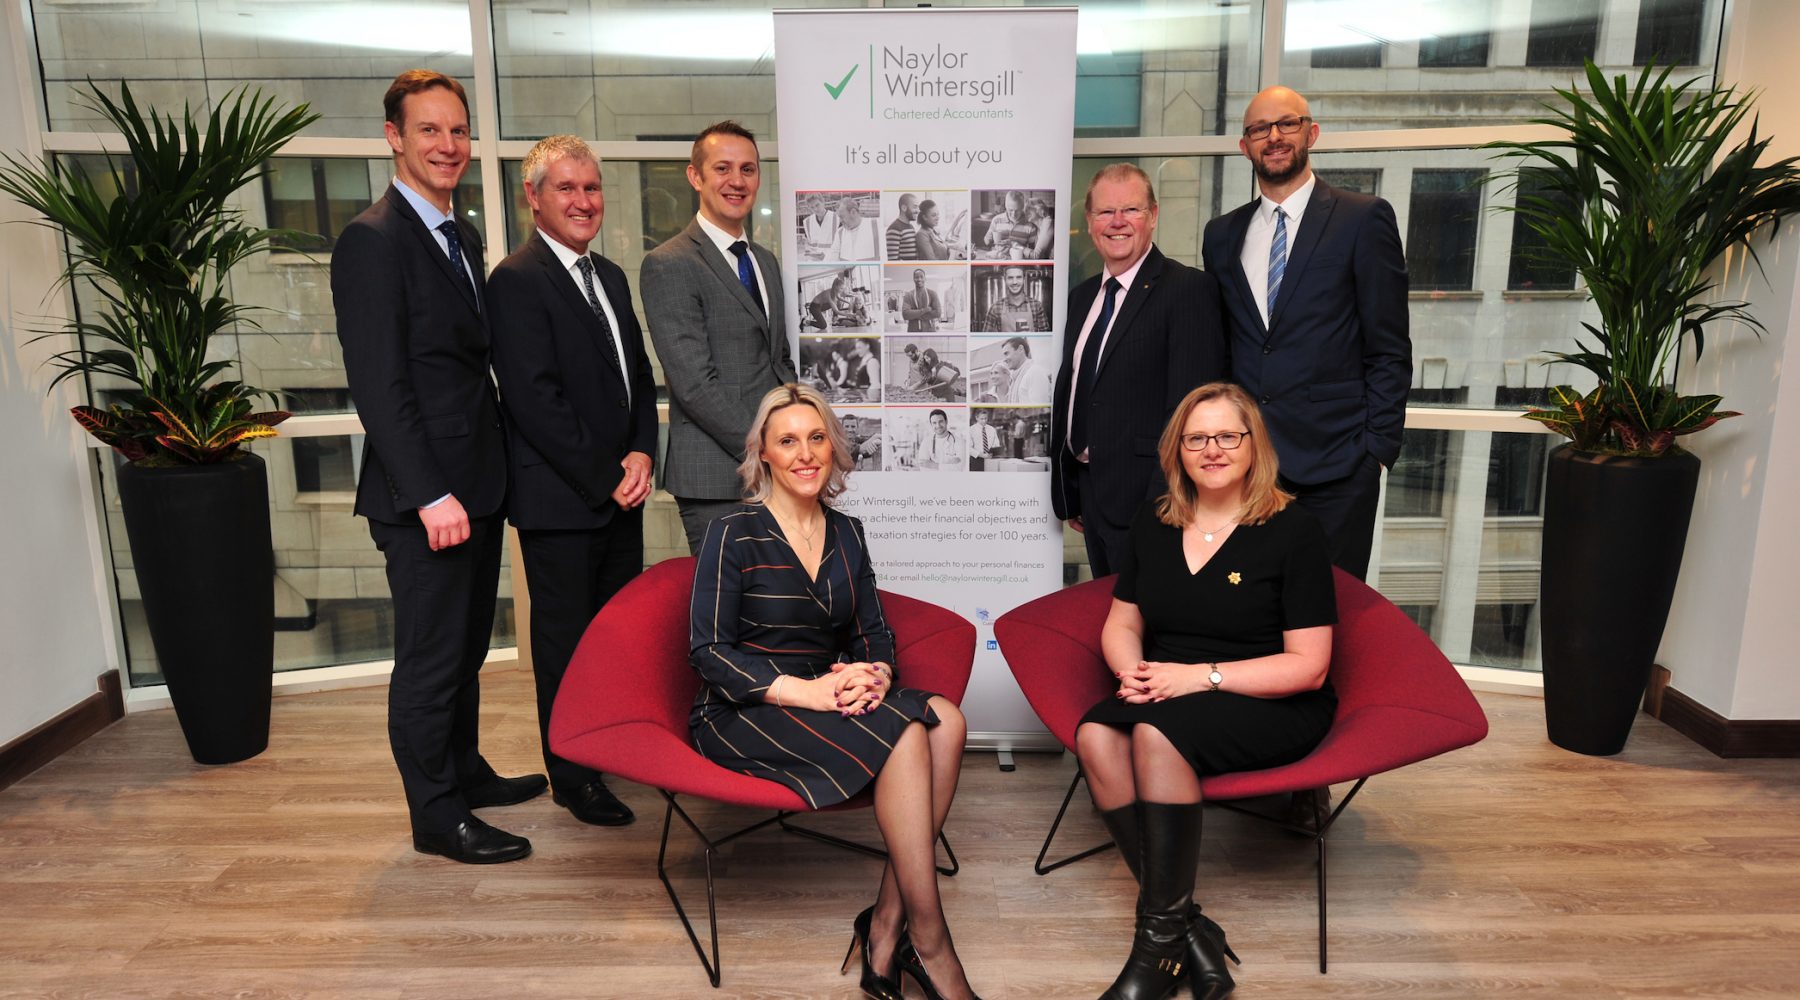 Bradford accountancy firm Naylor Wintersgill opens new office